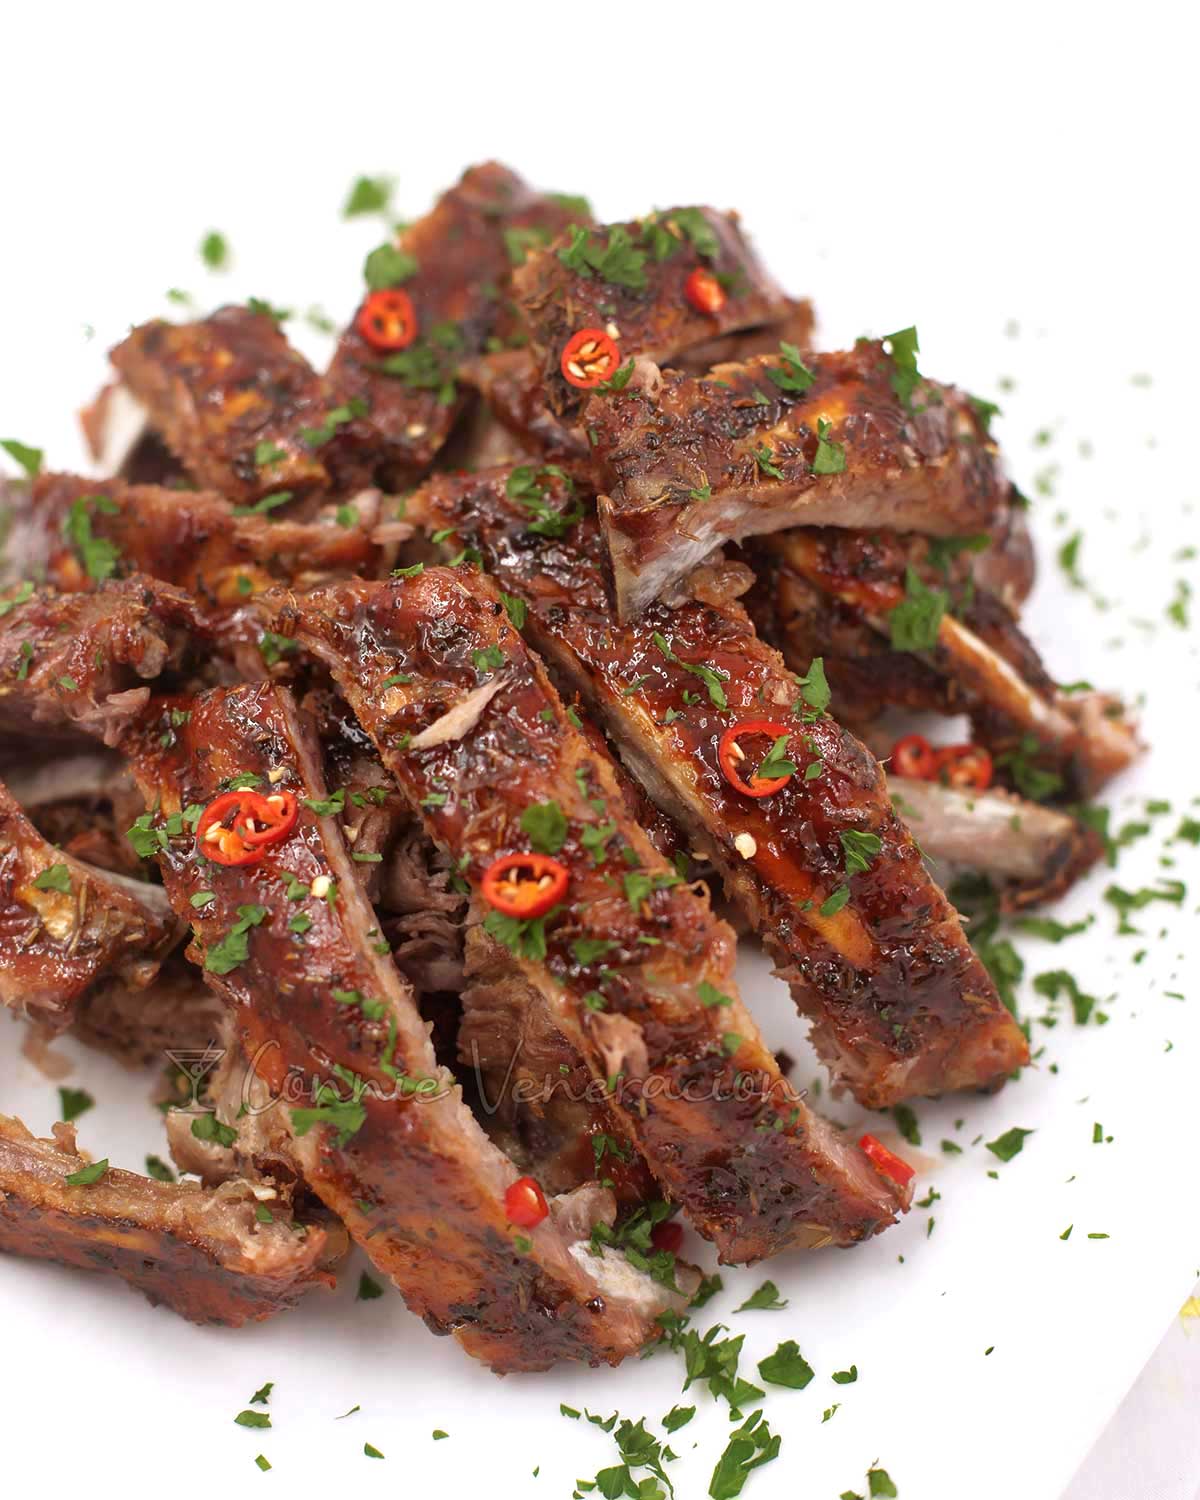 Cajun pork spare ribs garnished with chili slices and parsley